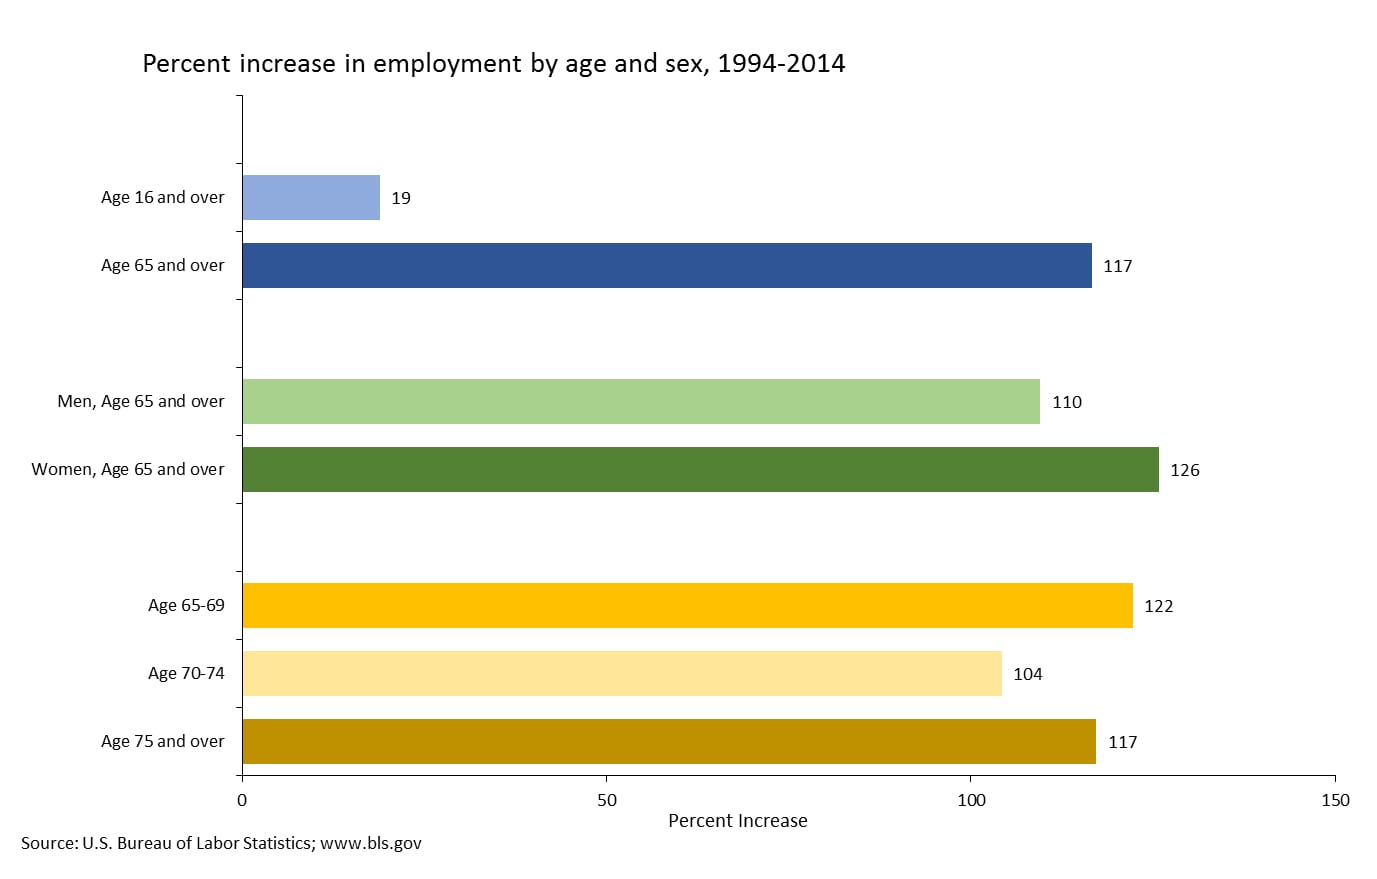 Graph showing percent increase in employment by age and sex, from 1994-2014